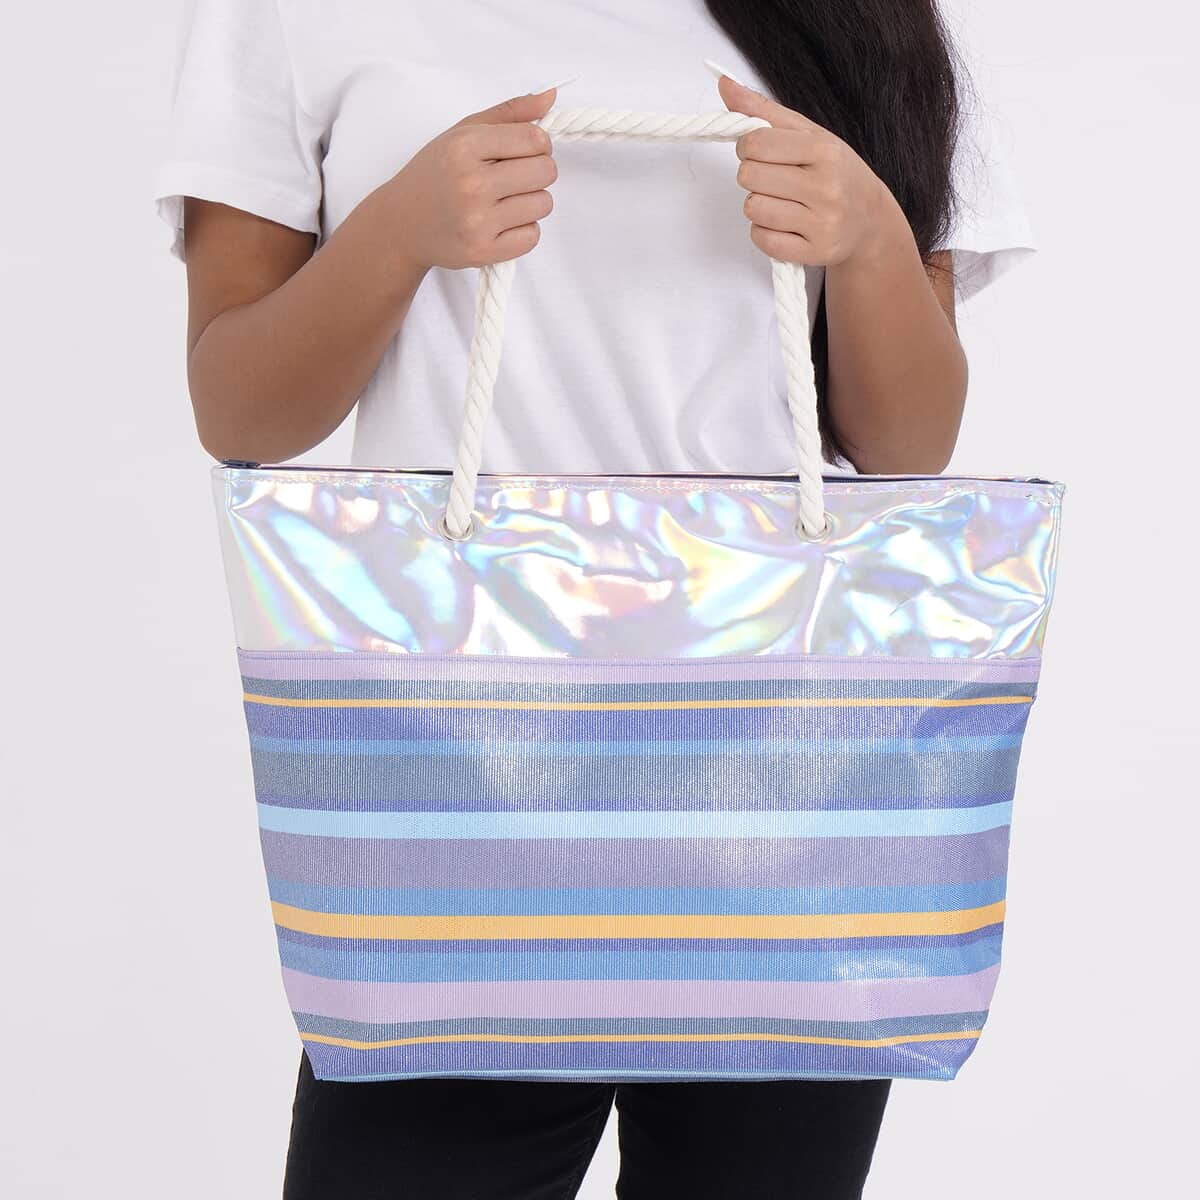 Blue and Gray Streak Pattern Canvas Faux Leather Tote Bag (19.7"x5.5"x14") image number 2